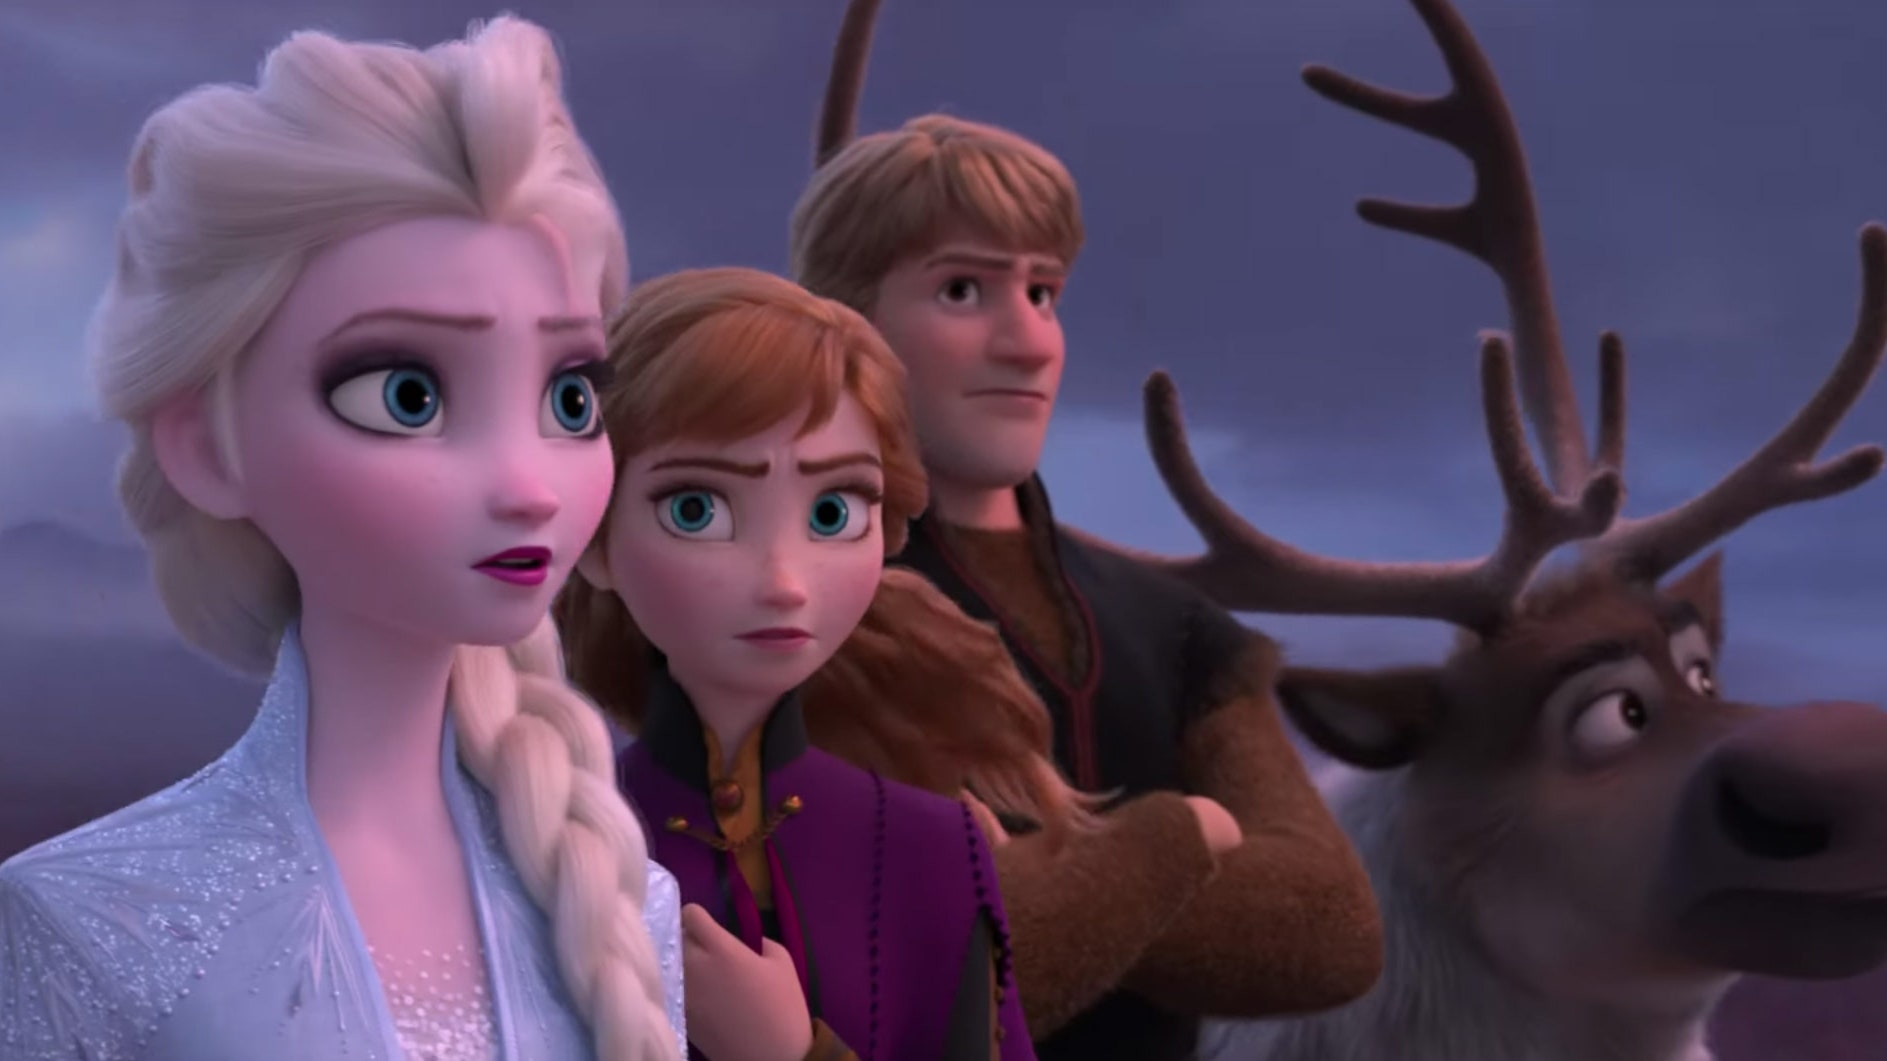 Image from Frozen II courtesy of Disney